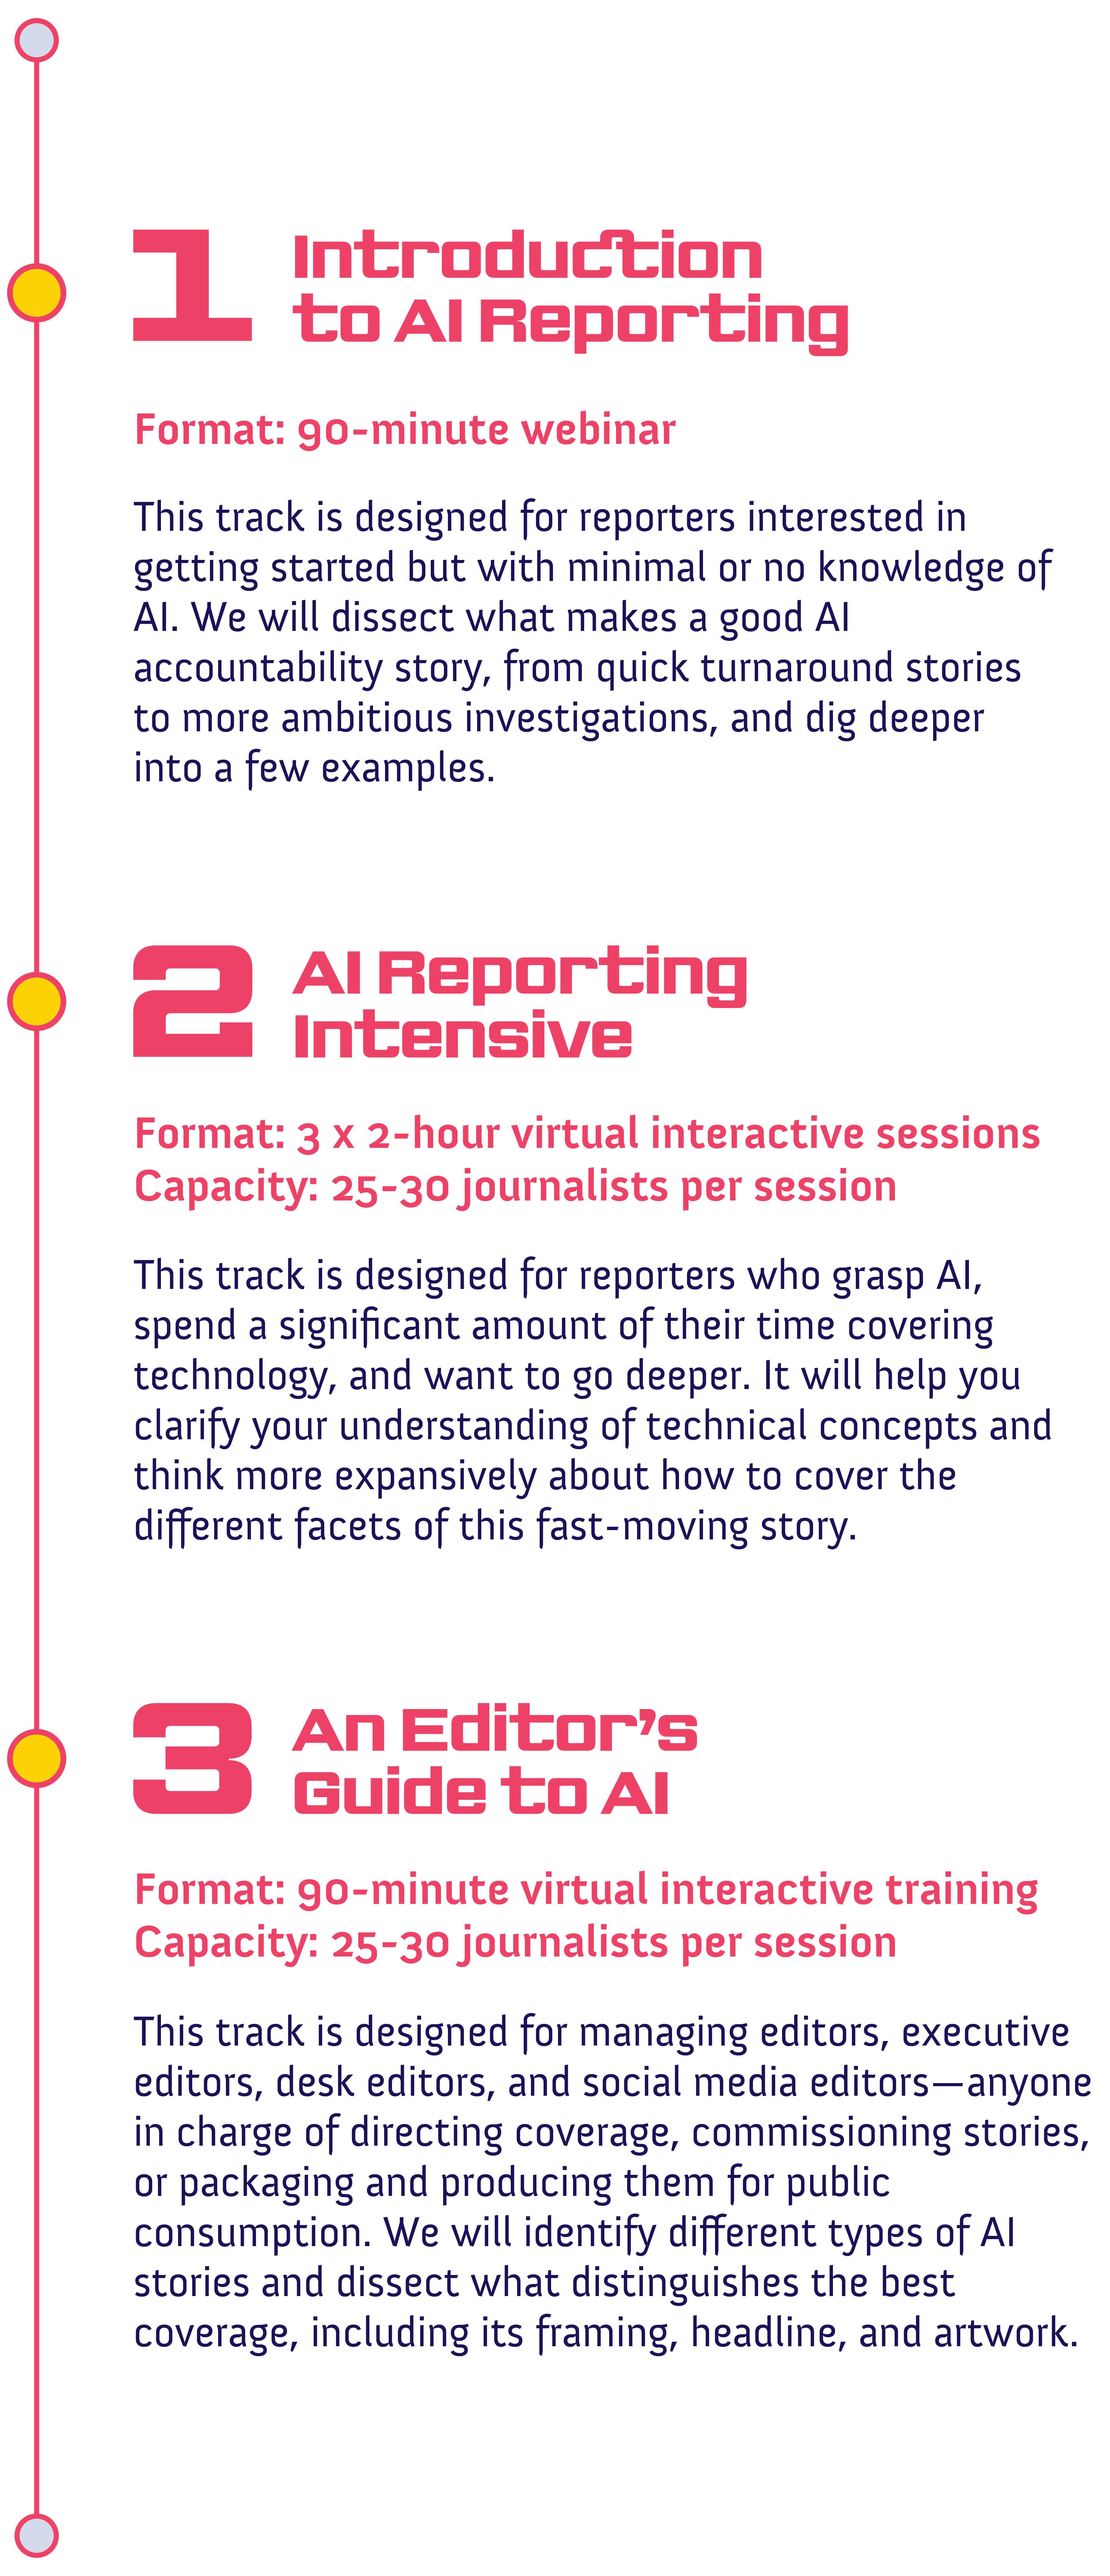 Track #1: Introduction to AI reporting<br />
Format: 90-minute, virtual webinar-style training</p>
<p>This track is designed for reporters interested in getting started but with minimal or no knowledge of AI. We will dissect what makes a good AI accountability story, from quick turnaround stories to more ambitious investigations, and dig deeper into a few examples.</p>
<p>Track #2: AI Reporting Intensive<br />
Format: 3 x 2-hour virtual interactive sessions<br />
Capacity: 25-30 journalists per session</p>
<p>This track is designed for reporters who grasp AI, spend a significant amount of their time covering technology, and want to go deeper. It will help you clarify your understanding of technical concepts and think more expansively about how to cover the different facets of this fast-moving story.</p>
<p>Track #3: An Editor's Guide to AI<br />
Format: 90-minute virtual interactive training<br />
Capacity: 25-30 journalists per session</p>
<p>This track is designed for managing editors, executive editors, desk editors, and social media editors—anyone in charge of directing coverage, commissioning stories, or packaging and producing them for public consumption. We will identify different types of AI stories and dissect what distinguishes the best coverage, including its framing, headline, and artwork.